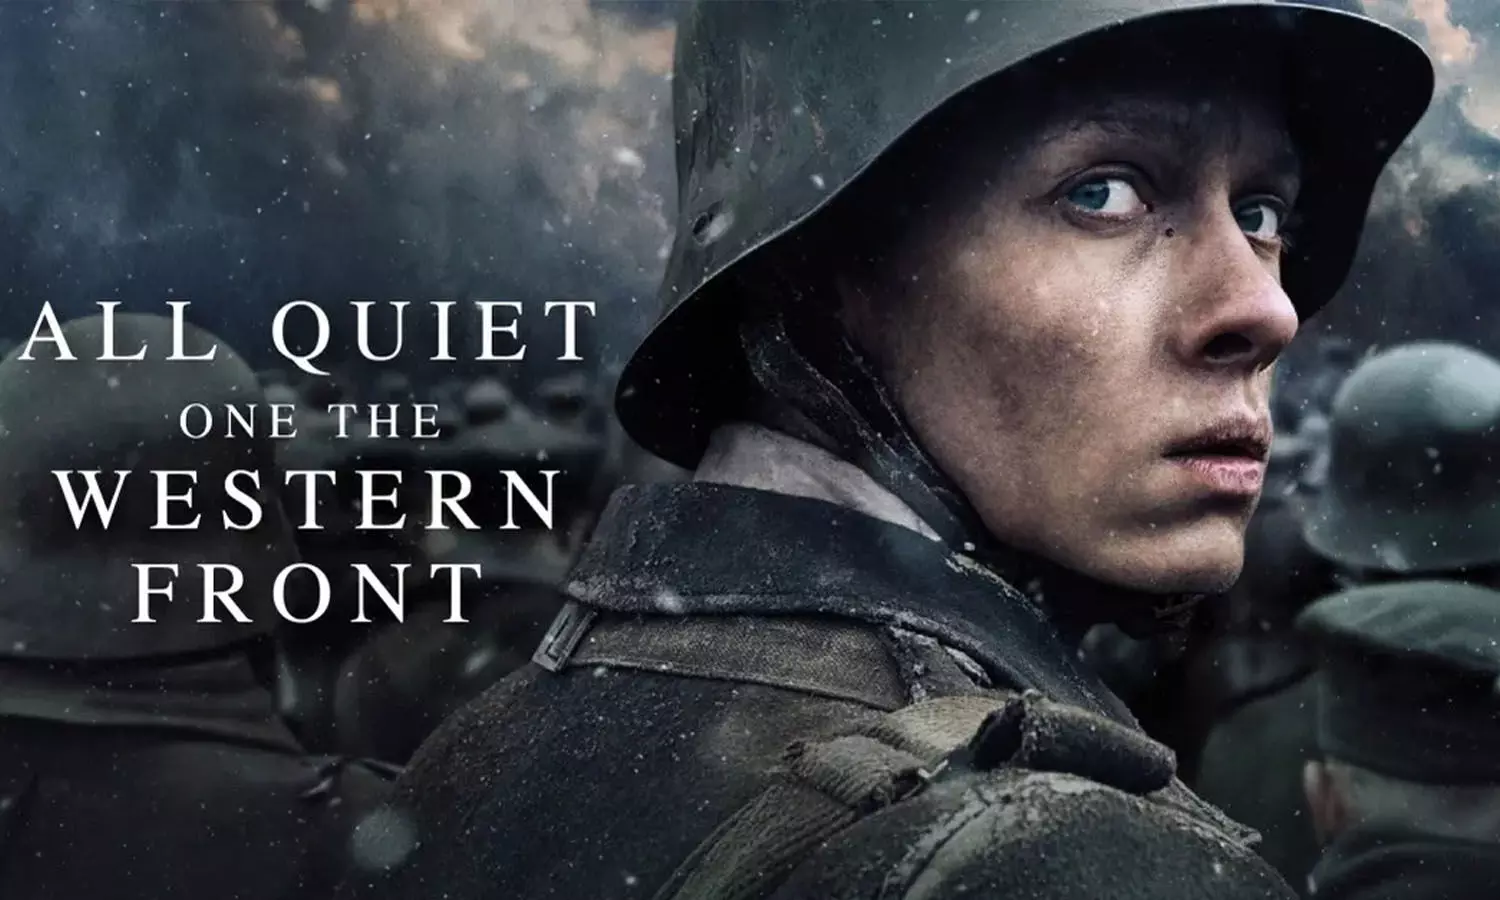 German Film All Quiet on the Western Front wins Best International Feature Film and three more Oscars